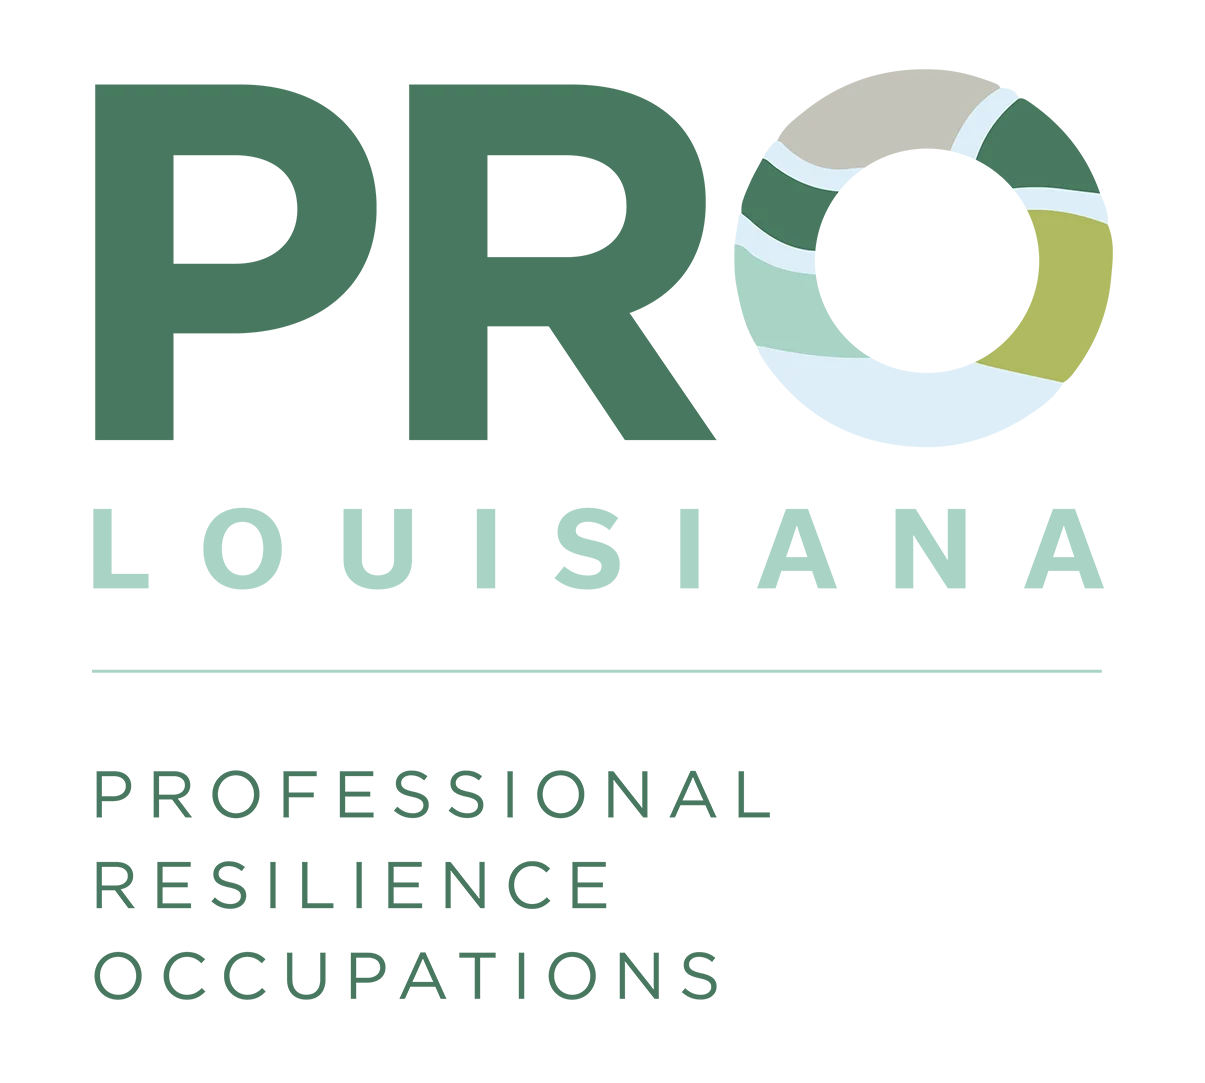 PROFESSIONAL RESILIENCE OCCUPATIONS